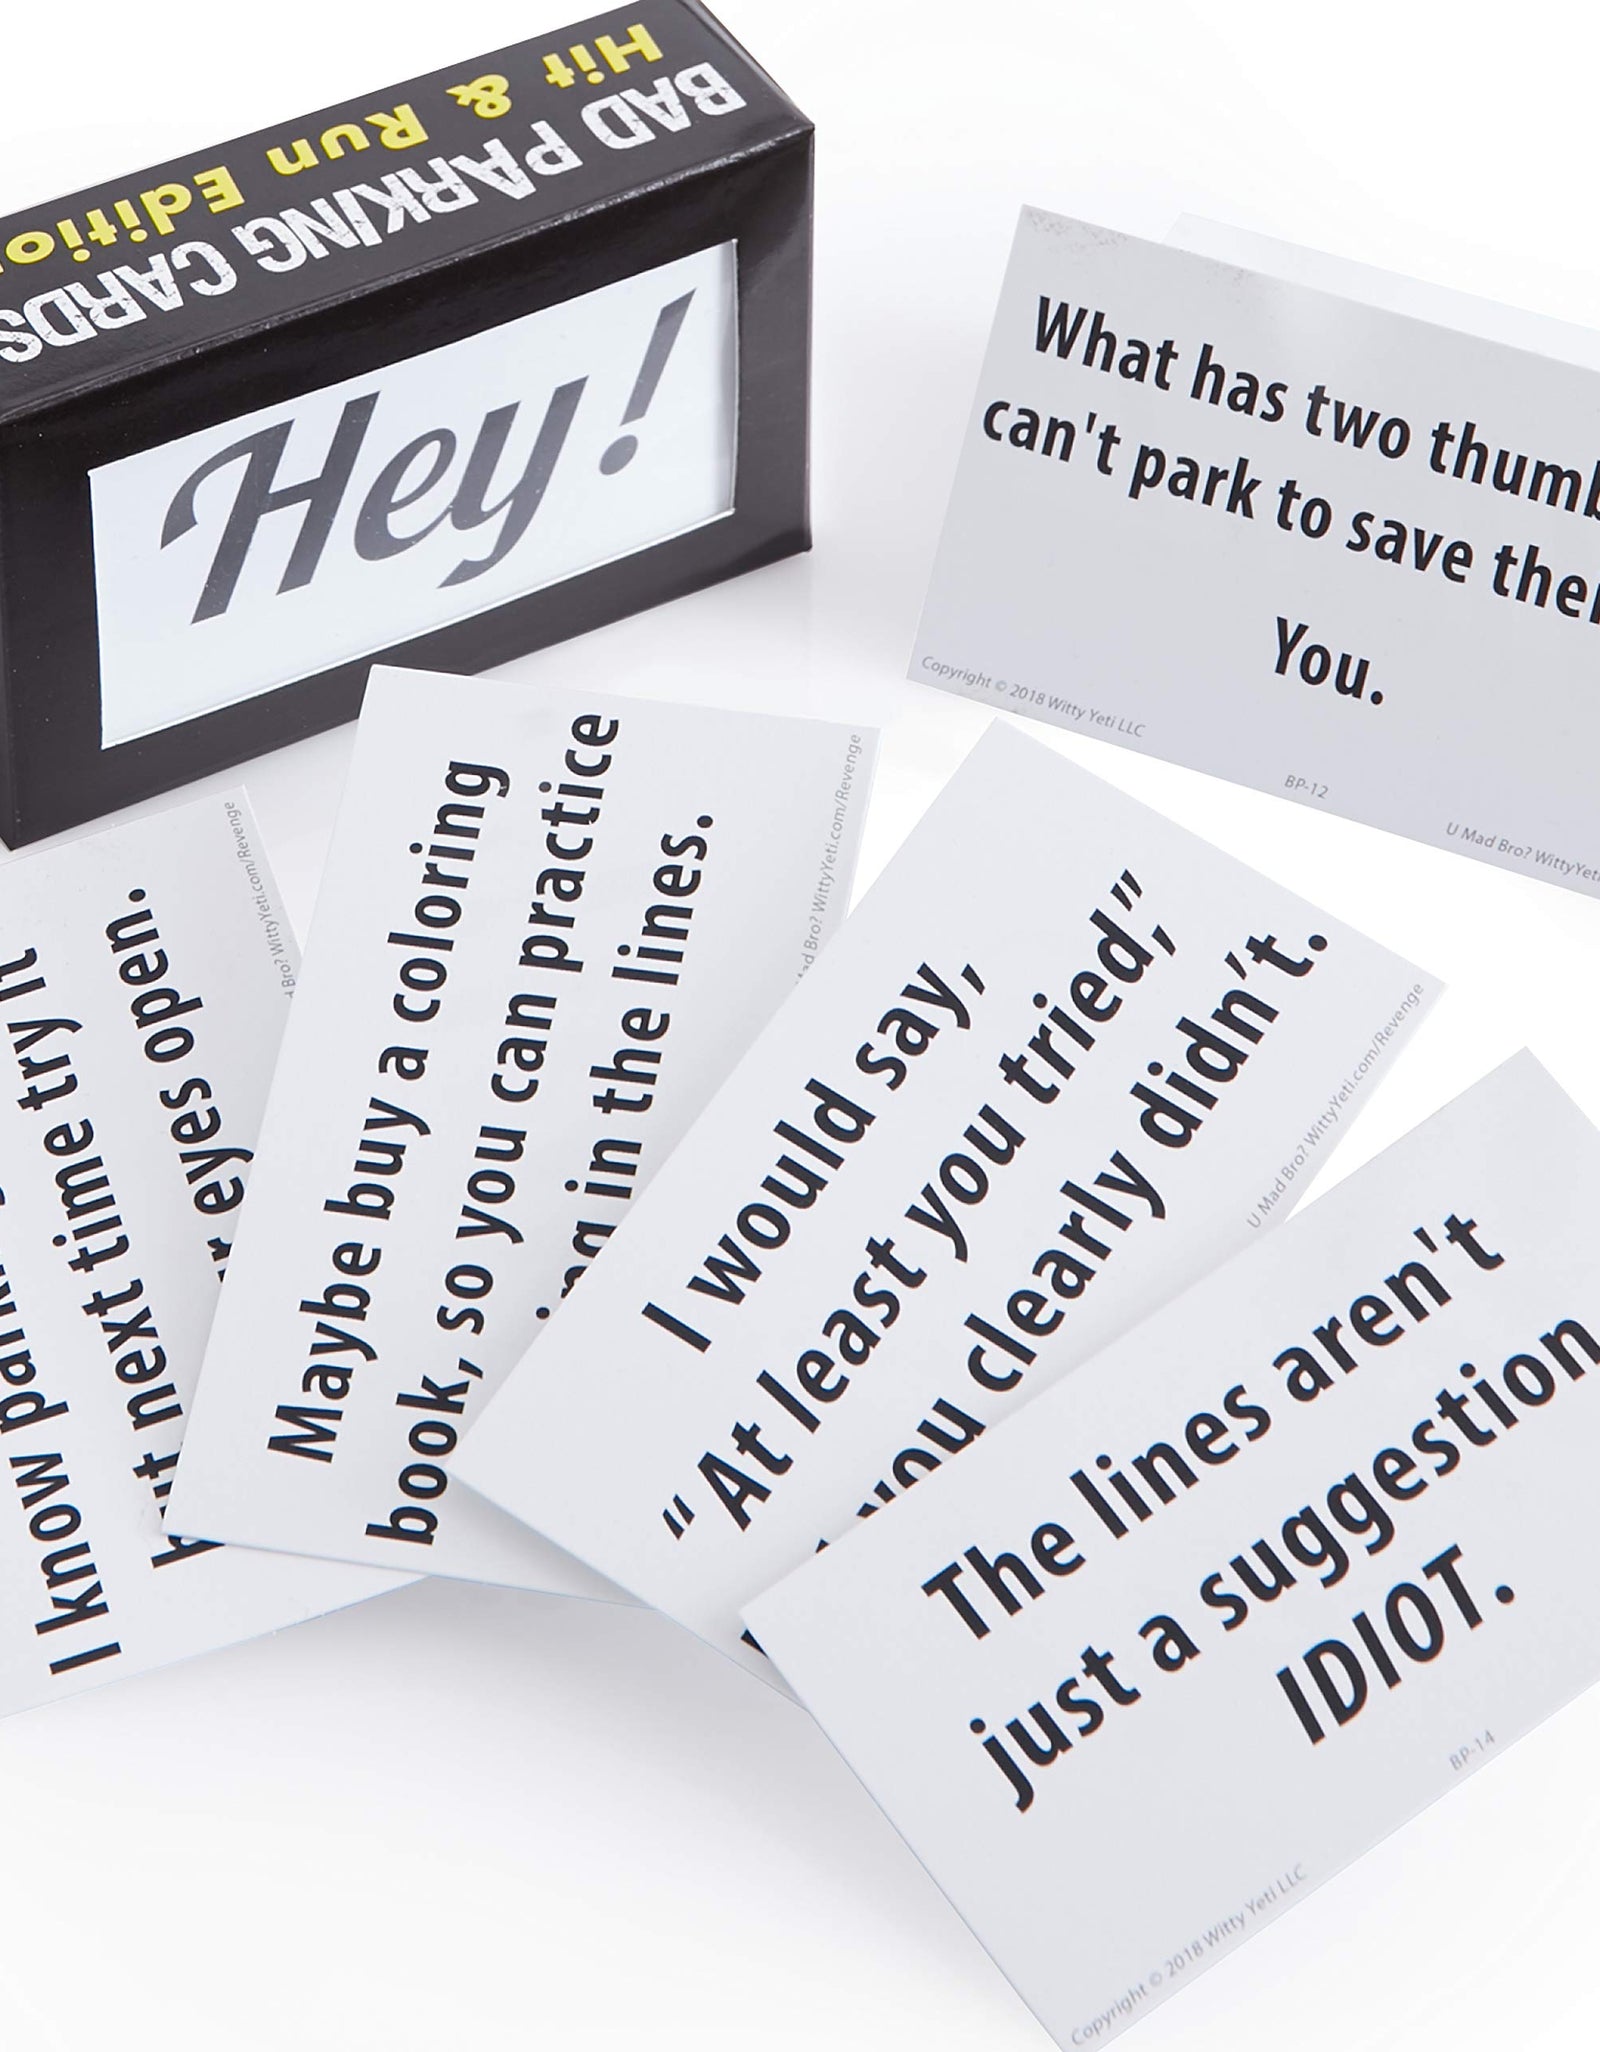 Super Hilarious, Bad Parking Cards 50 Pk. Get Revenge With Family-Friendly Novelty Notes. Feel the Satisfaction of Pranking Idiot Parkers With Funny Notices. Gag Cards Are Great Xmas Stocking Stuffers